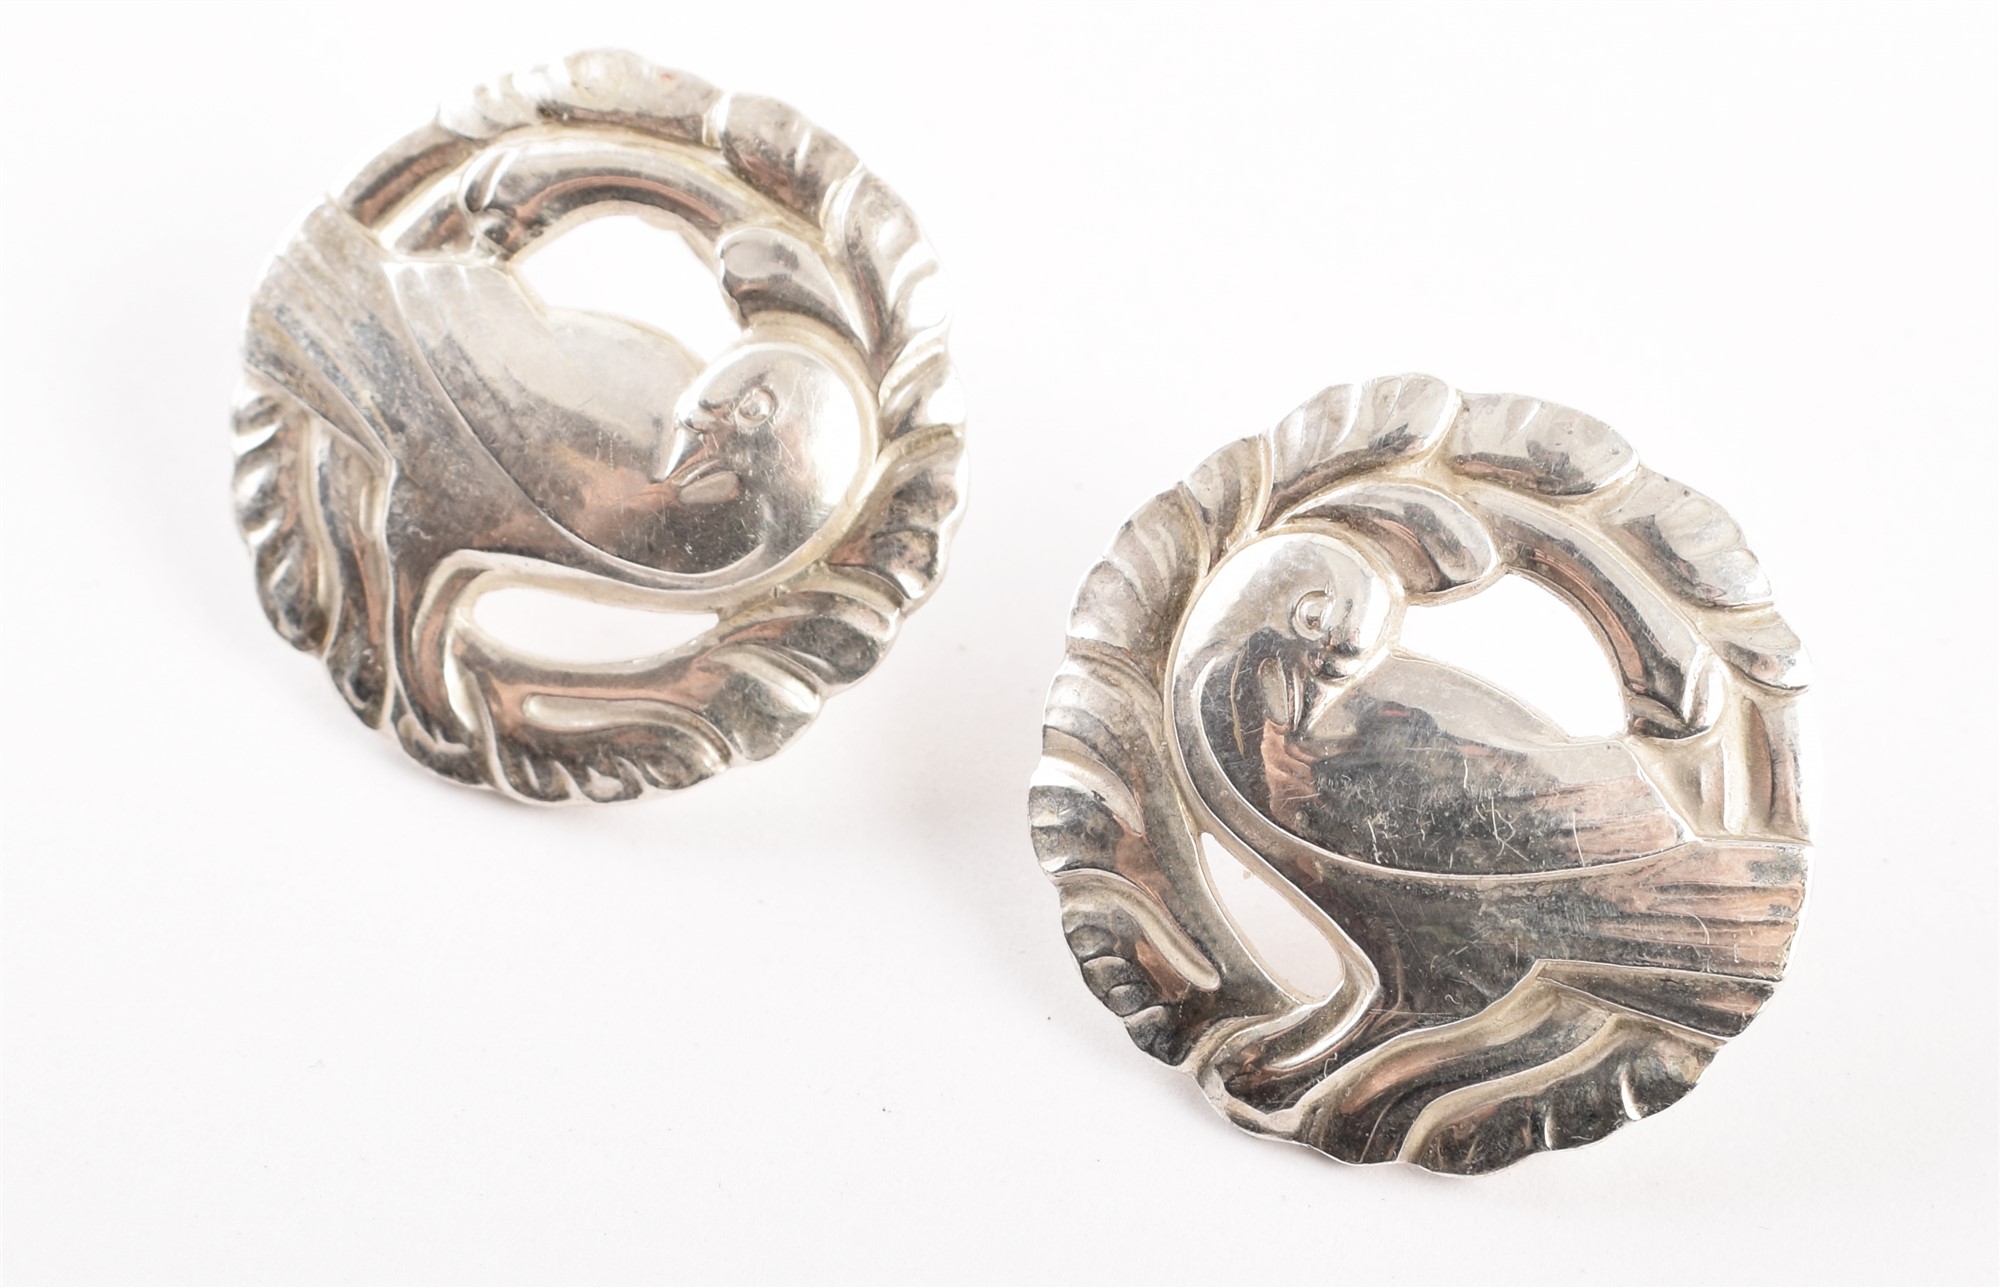 Georg Jensen sterling silver dove earrings , circular wreath design with central dove motif,